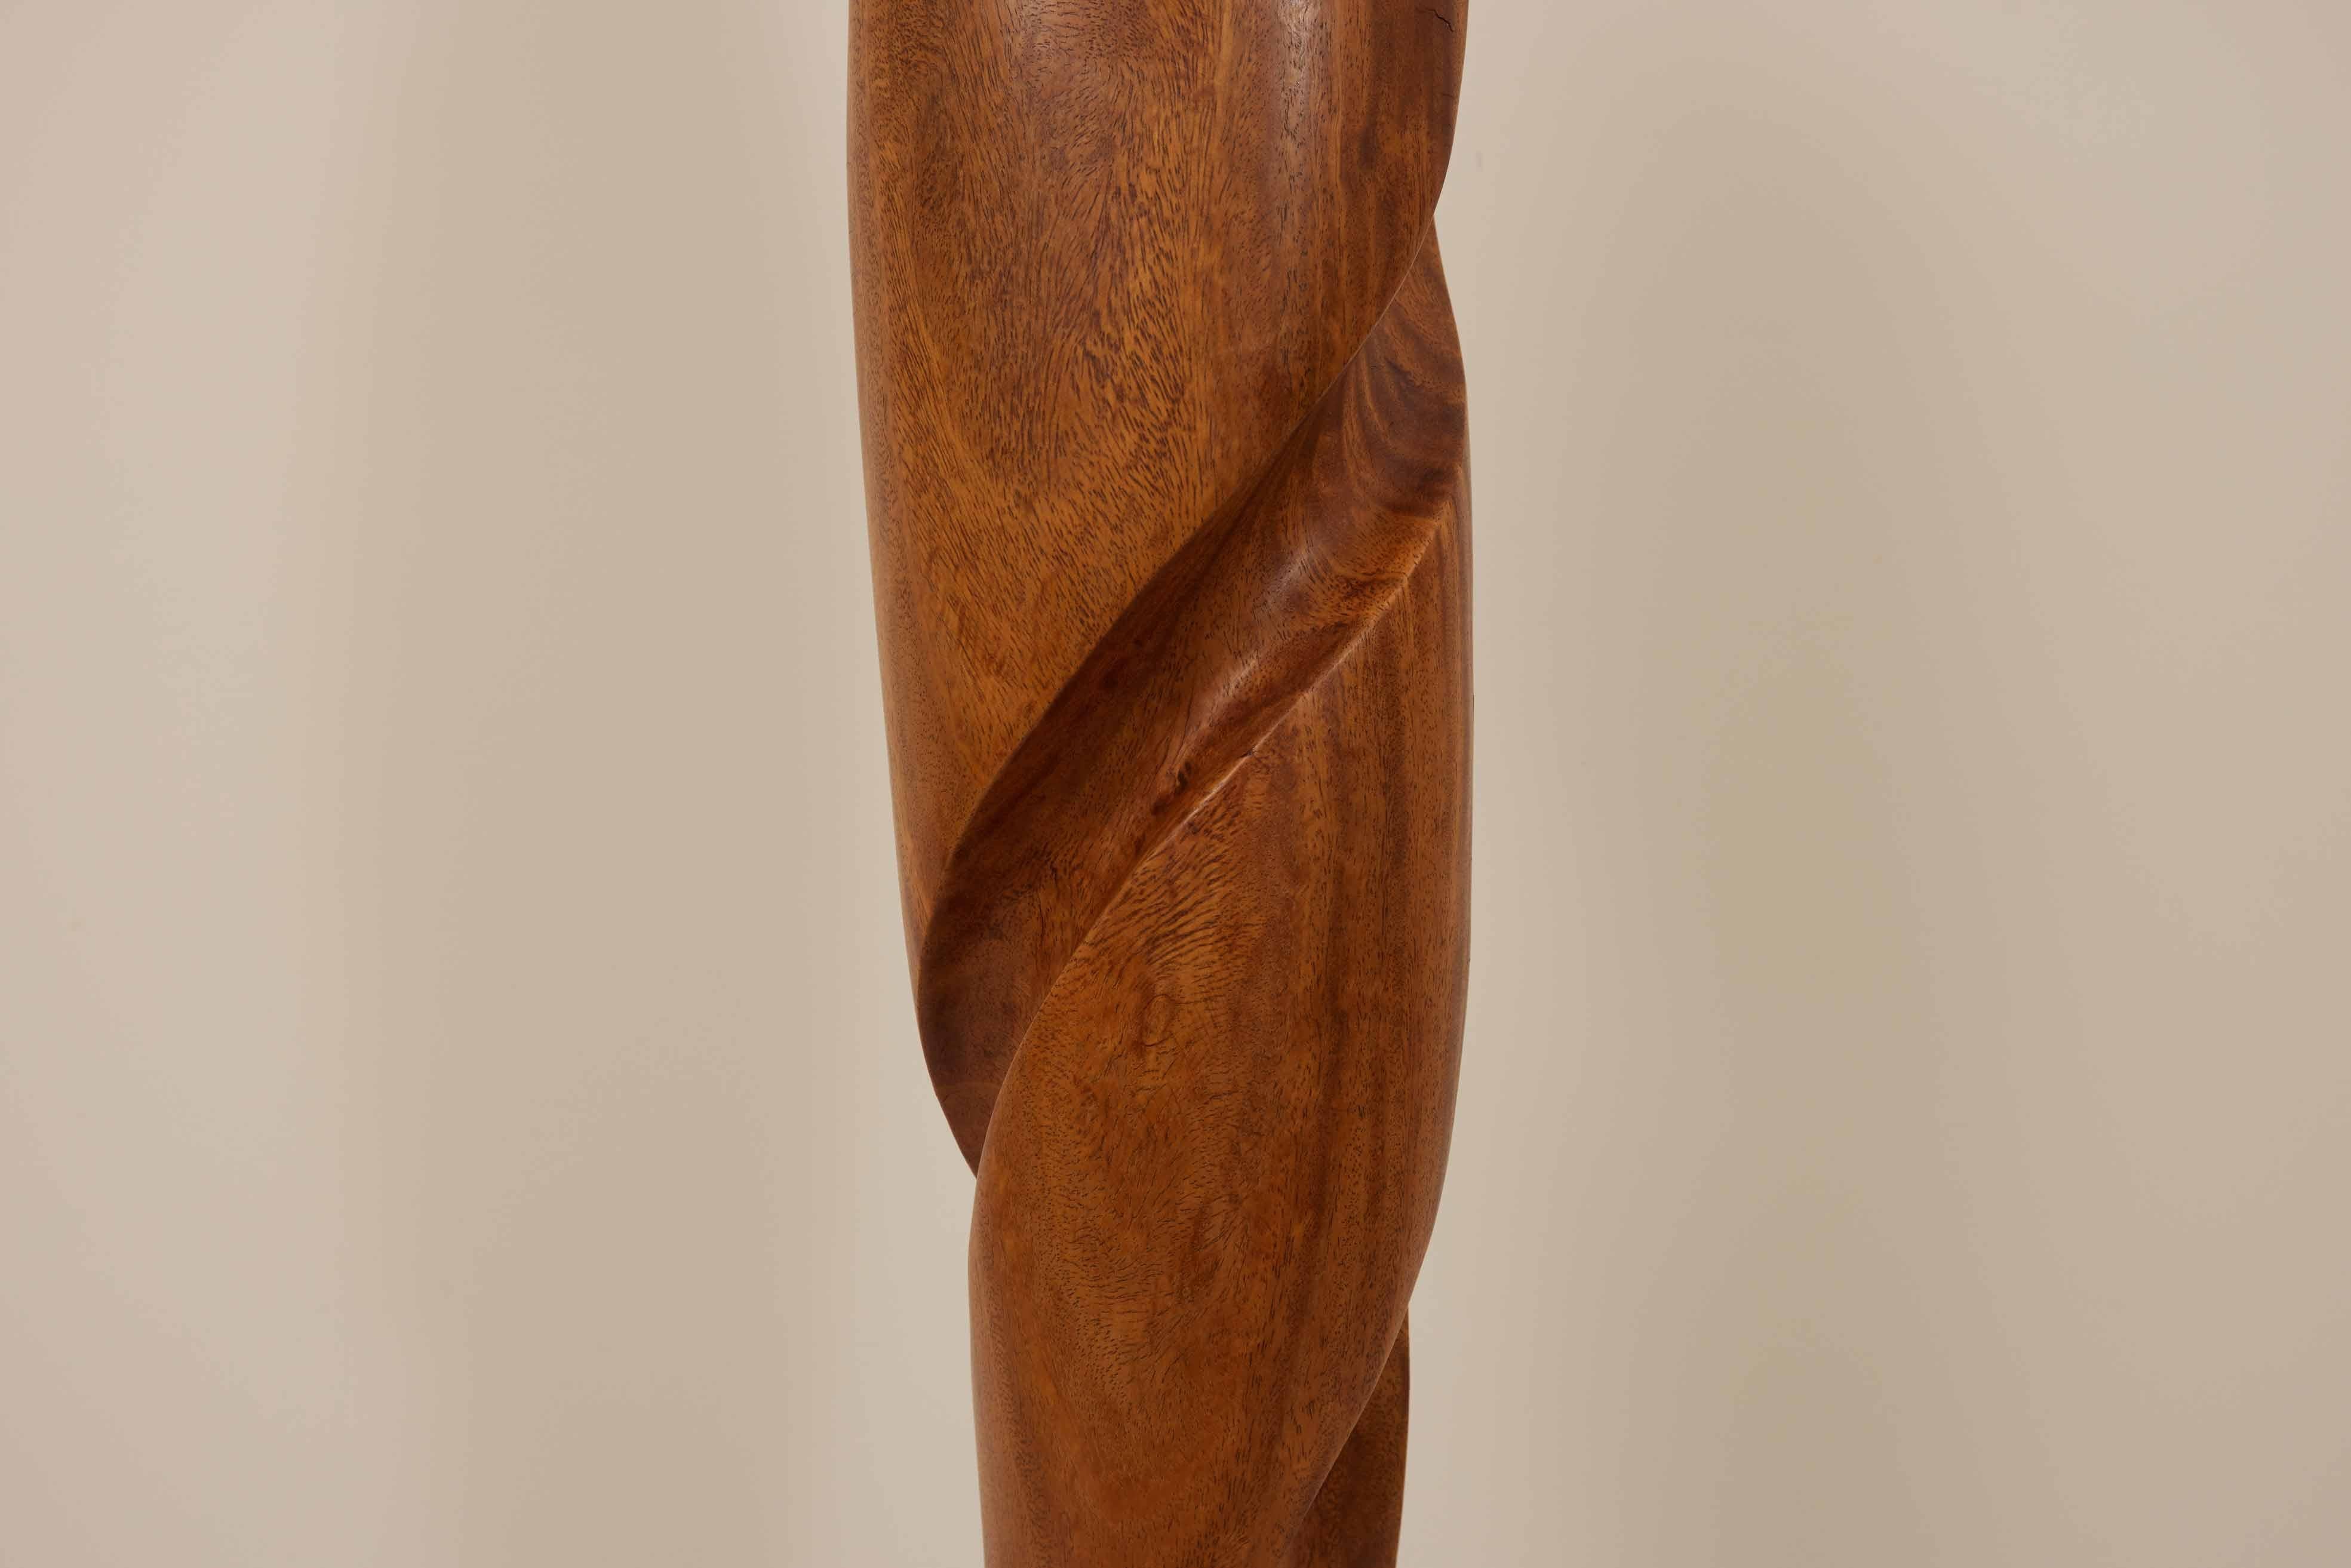 Hand-Carved  Henry Moretti Mahogany Sculpture  1970s For Sale